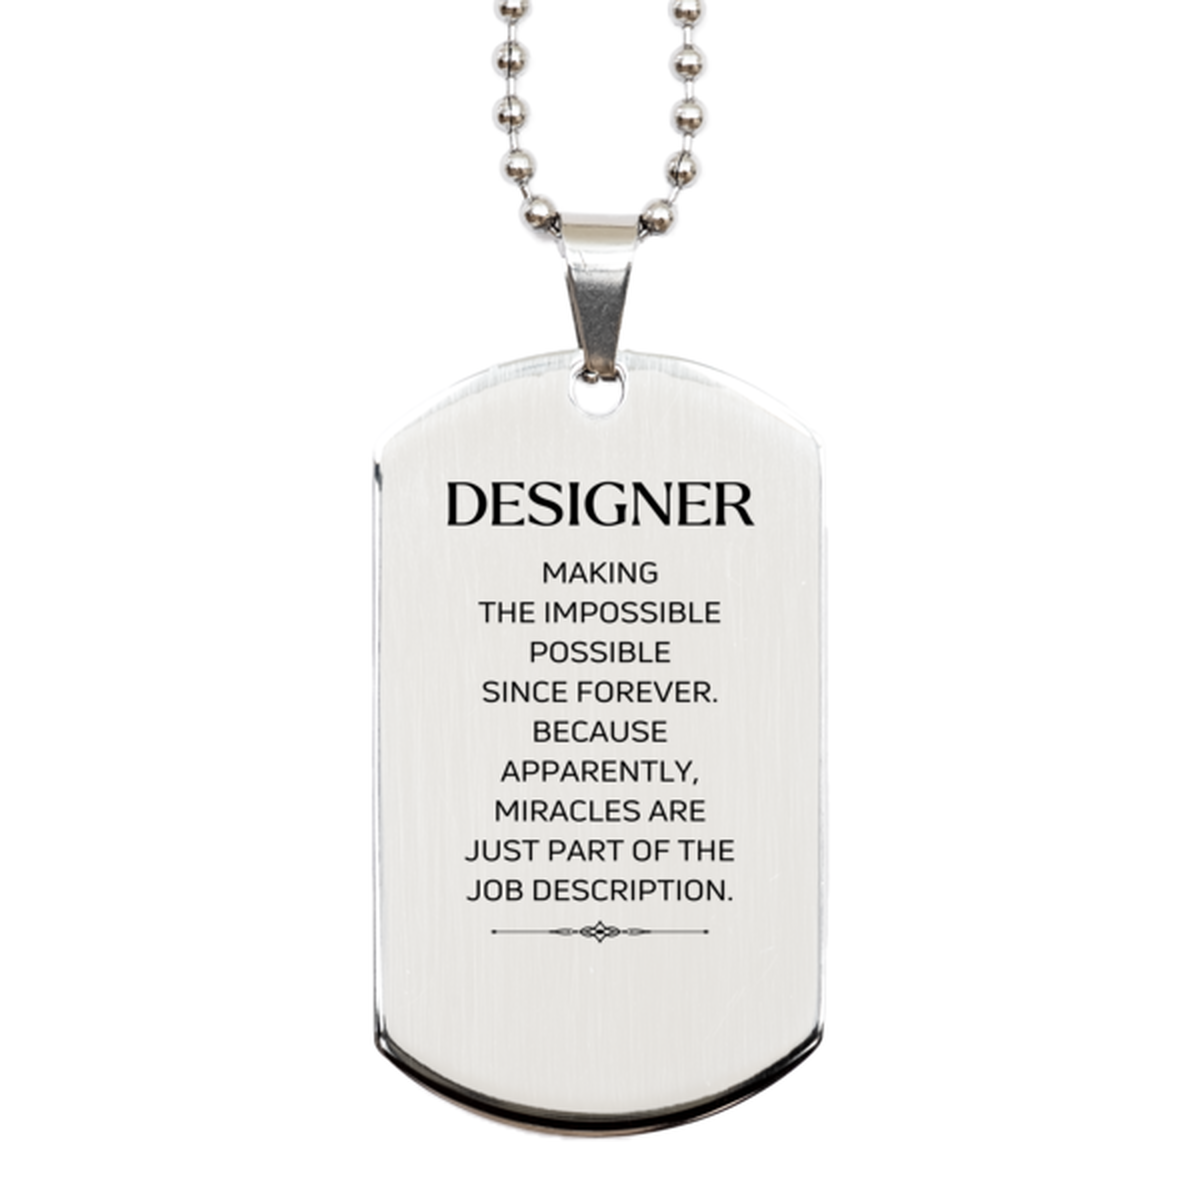 Funny Designer Gifts, Miracles are just part of the job description, Inspirational Birthday Silver Dog Tag For Designer, Men, Women, Coworkers, Friends, Boss